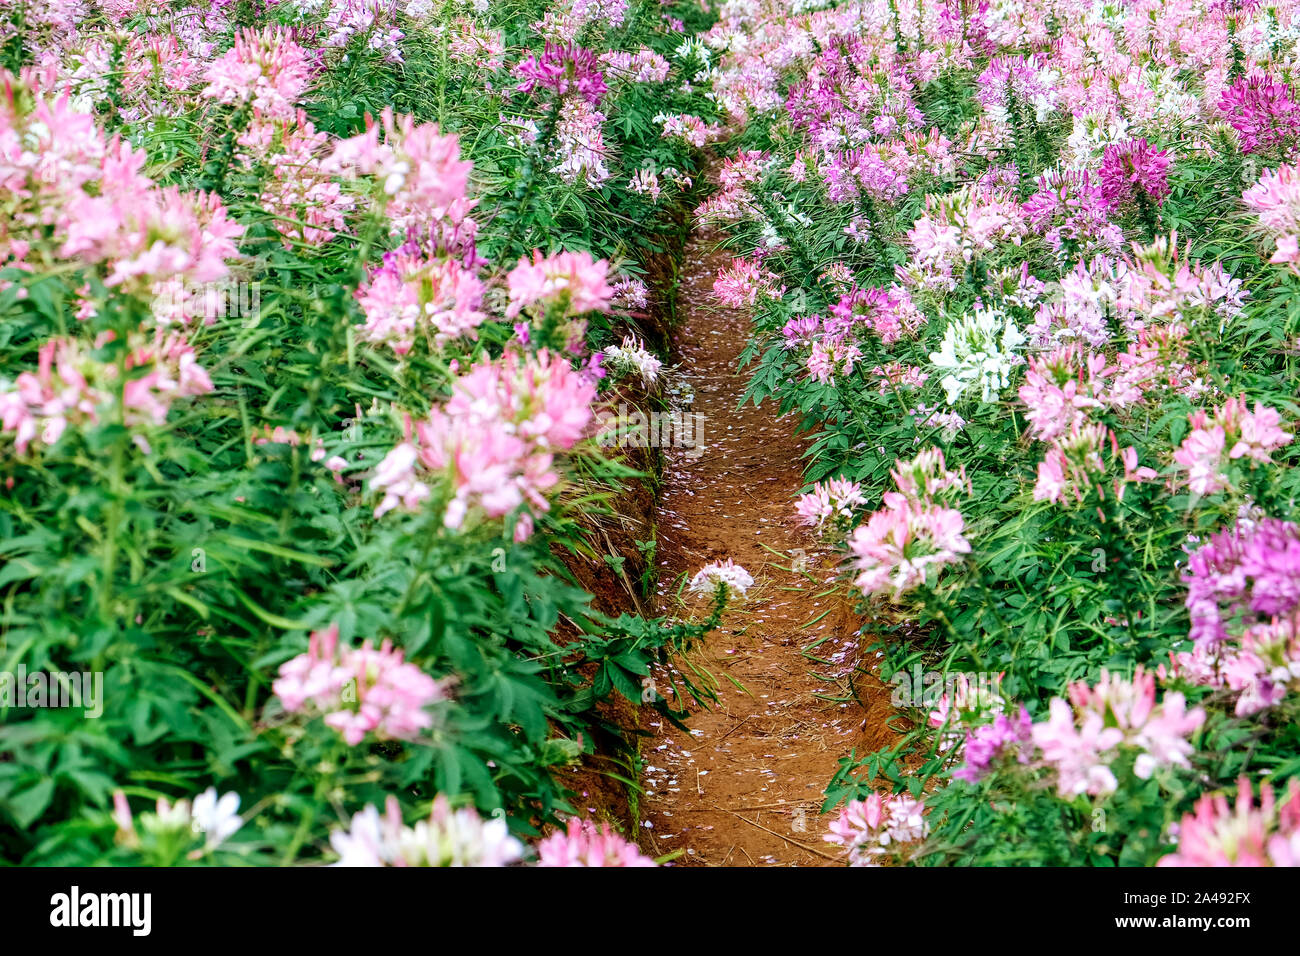 Pink and white beautiful Spider flower in the garden Stock Photo